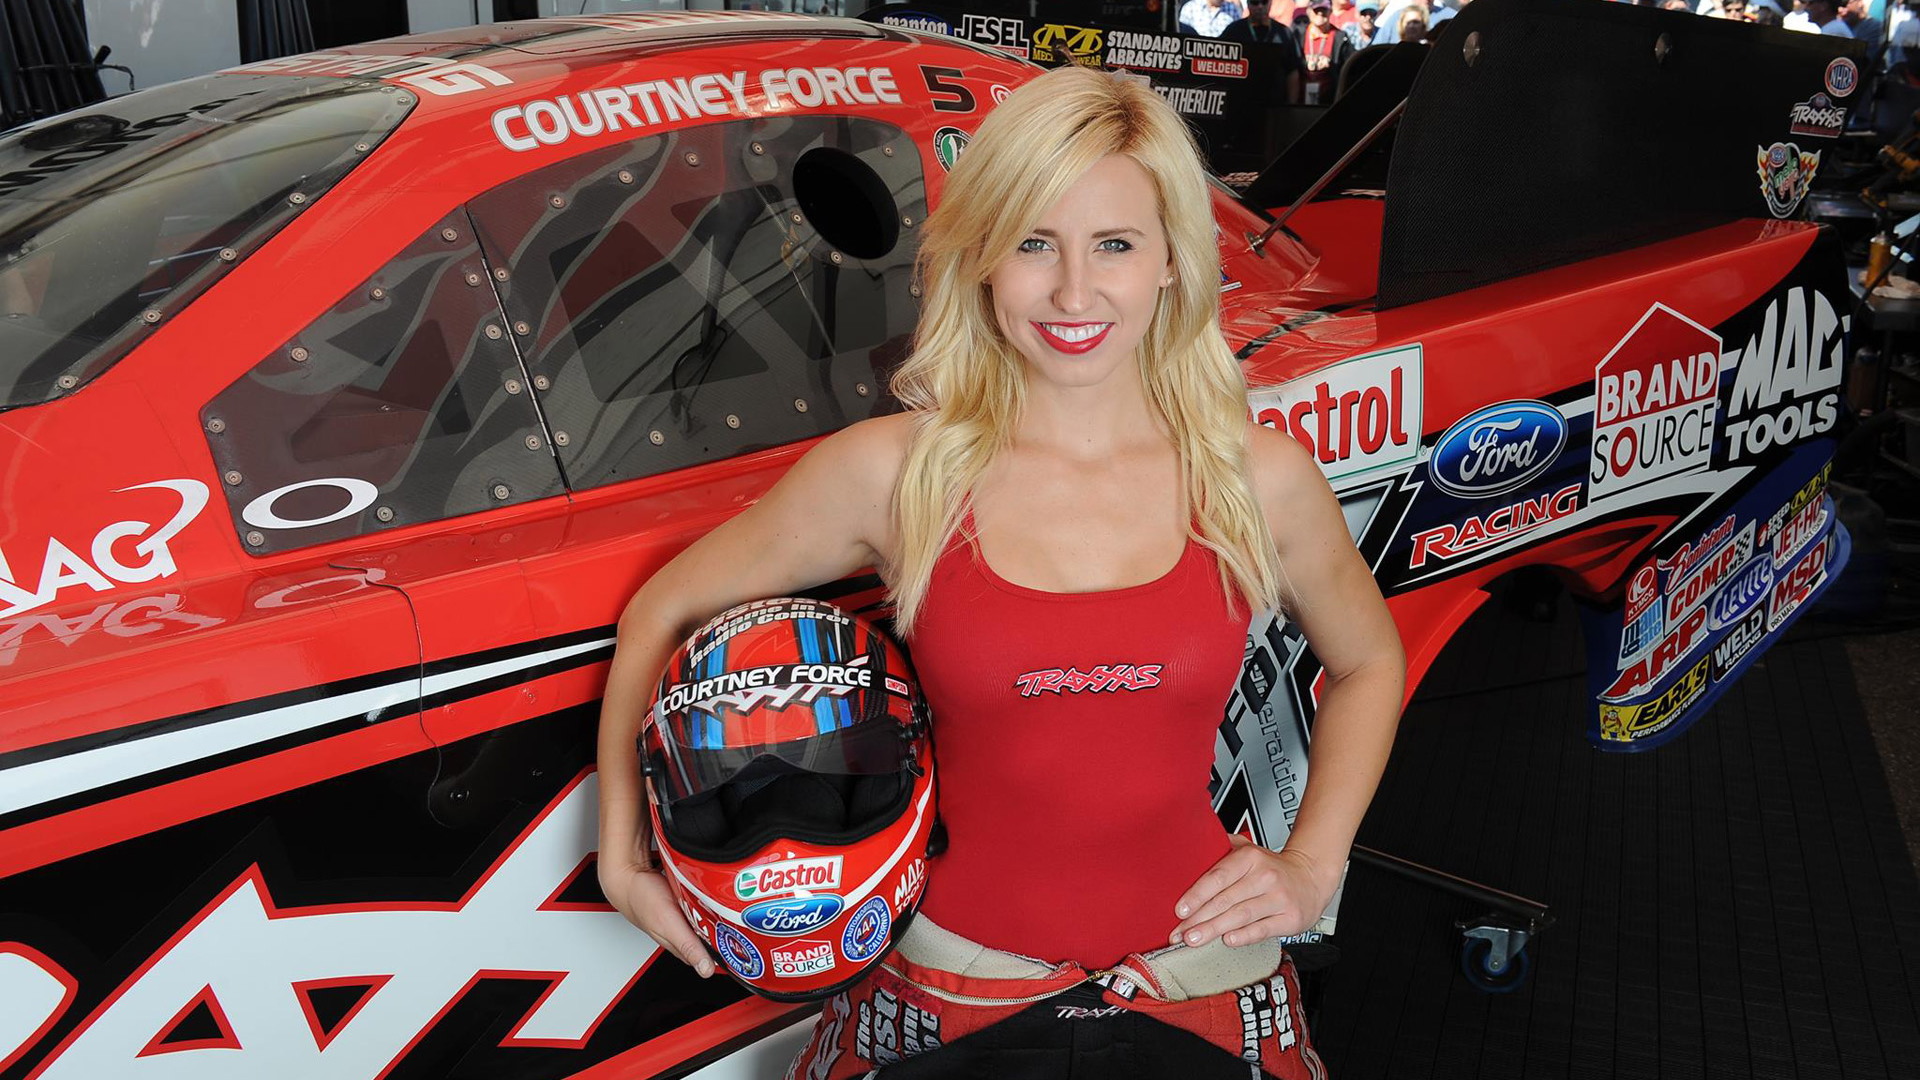 Courtney Force - Image via Courtney Force Facebook page.